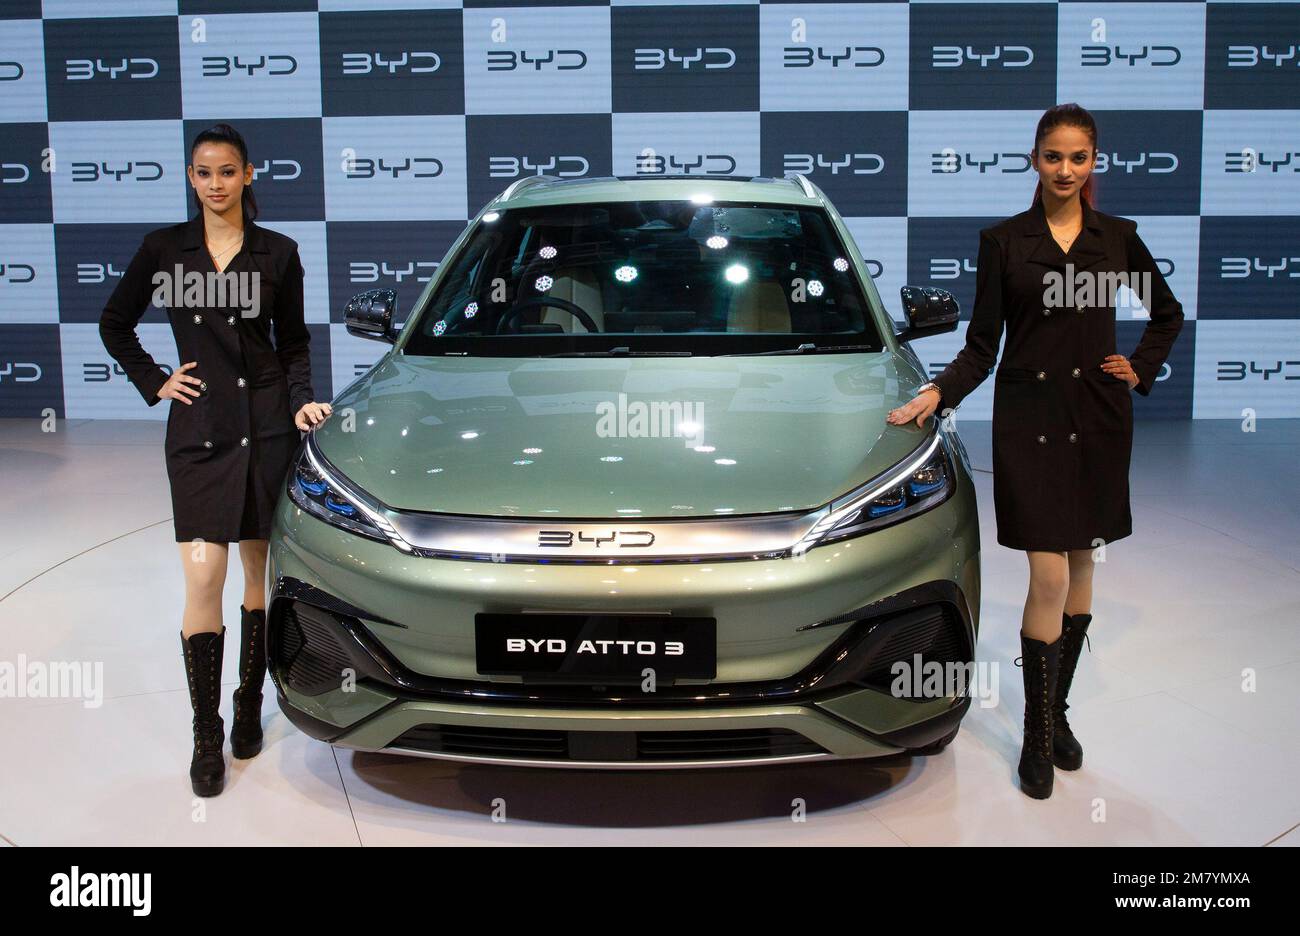 New Delhi, India. 11th Jan, 2023. Models stand next to a BYD Atto 3 car during the Auto Expo 2023 in the outskirts of New Delhi, India, Jan. 11, 2023. Credit: Javed Dar/Xinhua/Alamy Live News Stock Photo